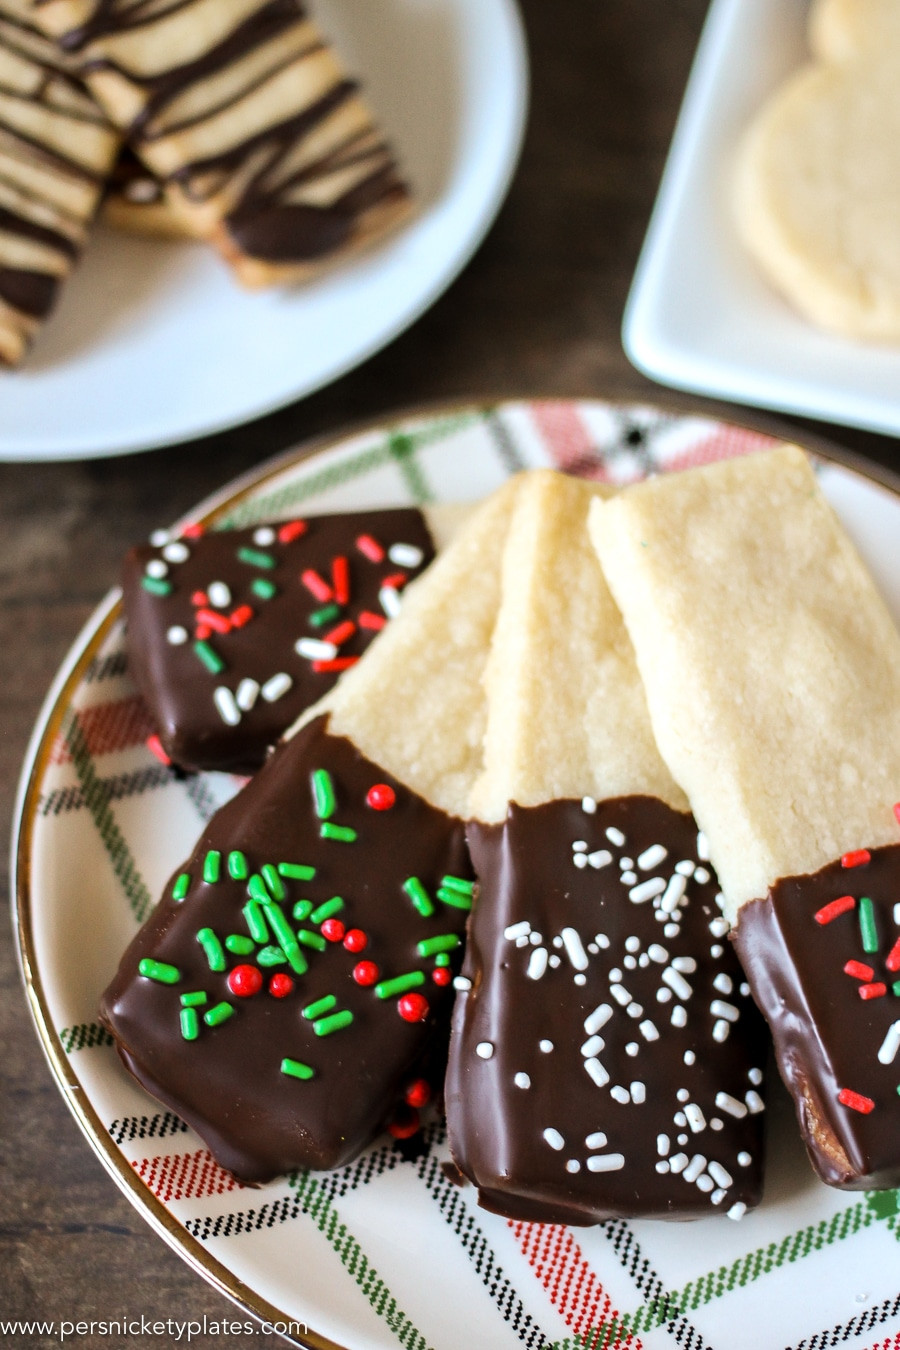 Shortbread Cookies Dipped In Chocolate
 Chocolate Dipped Shortbread Cookies Persnickety Plates